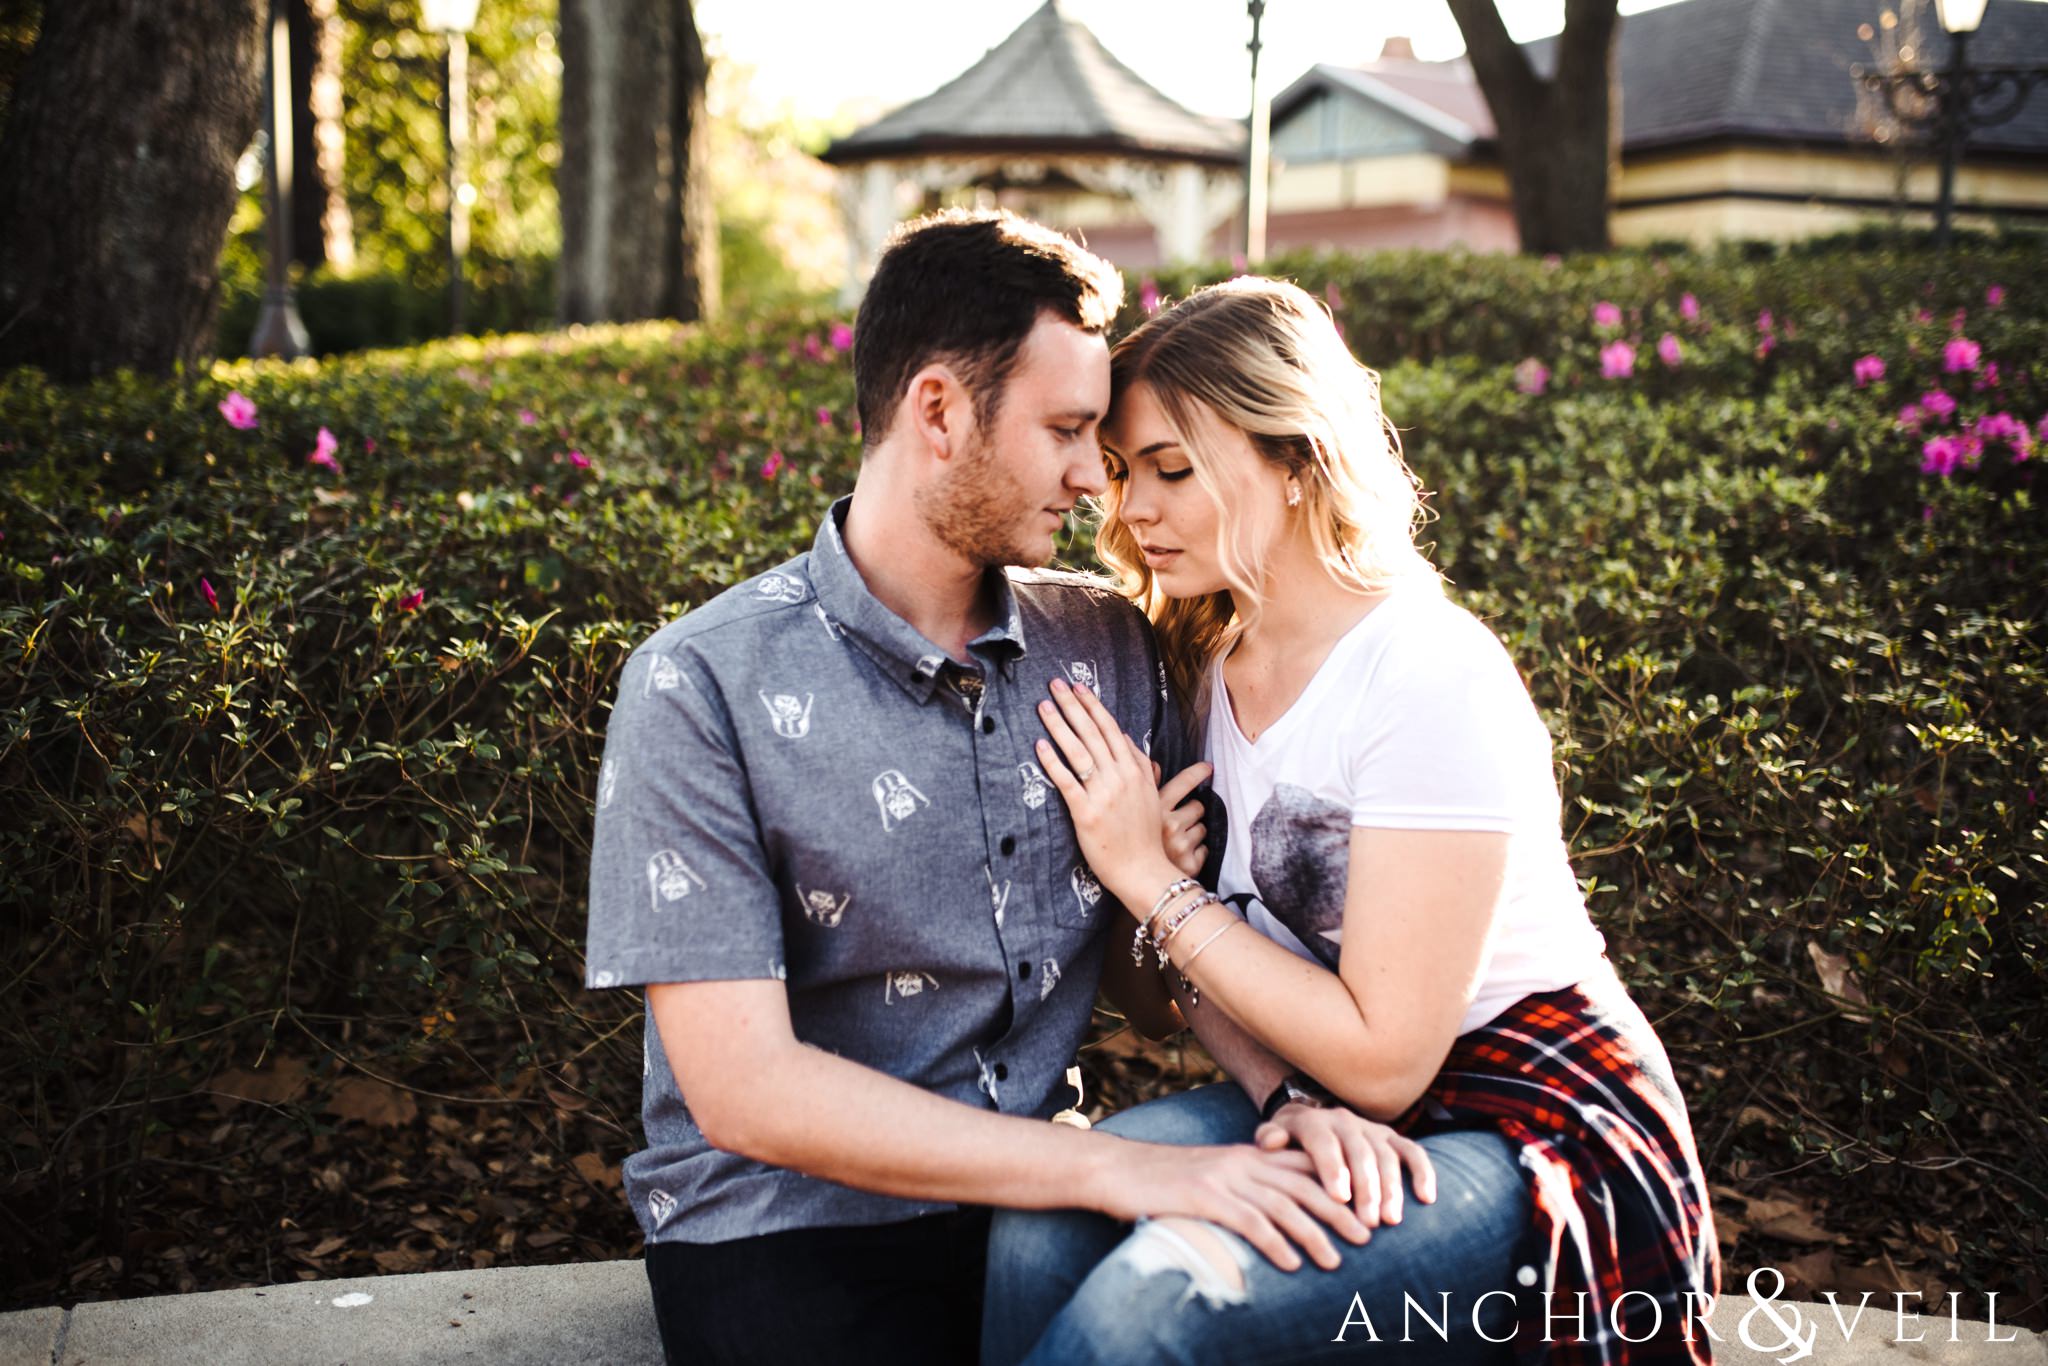 cuddling on the wall together during their Disney world engagement session at Disney's Magic Kingdom